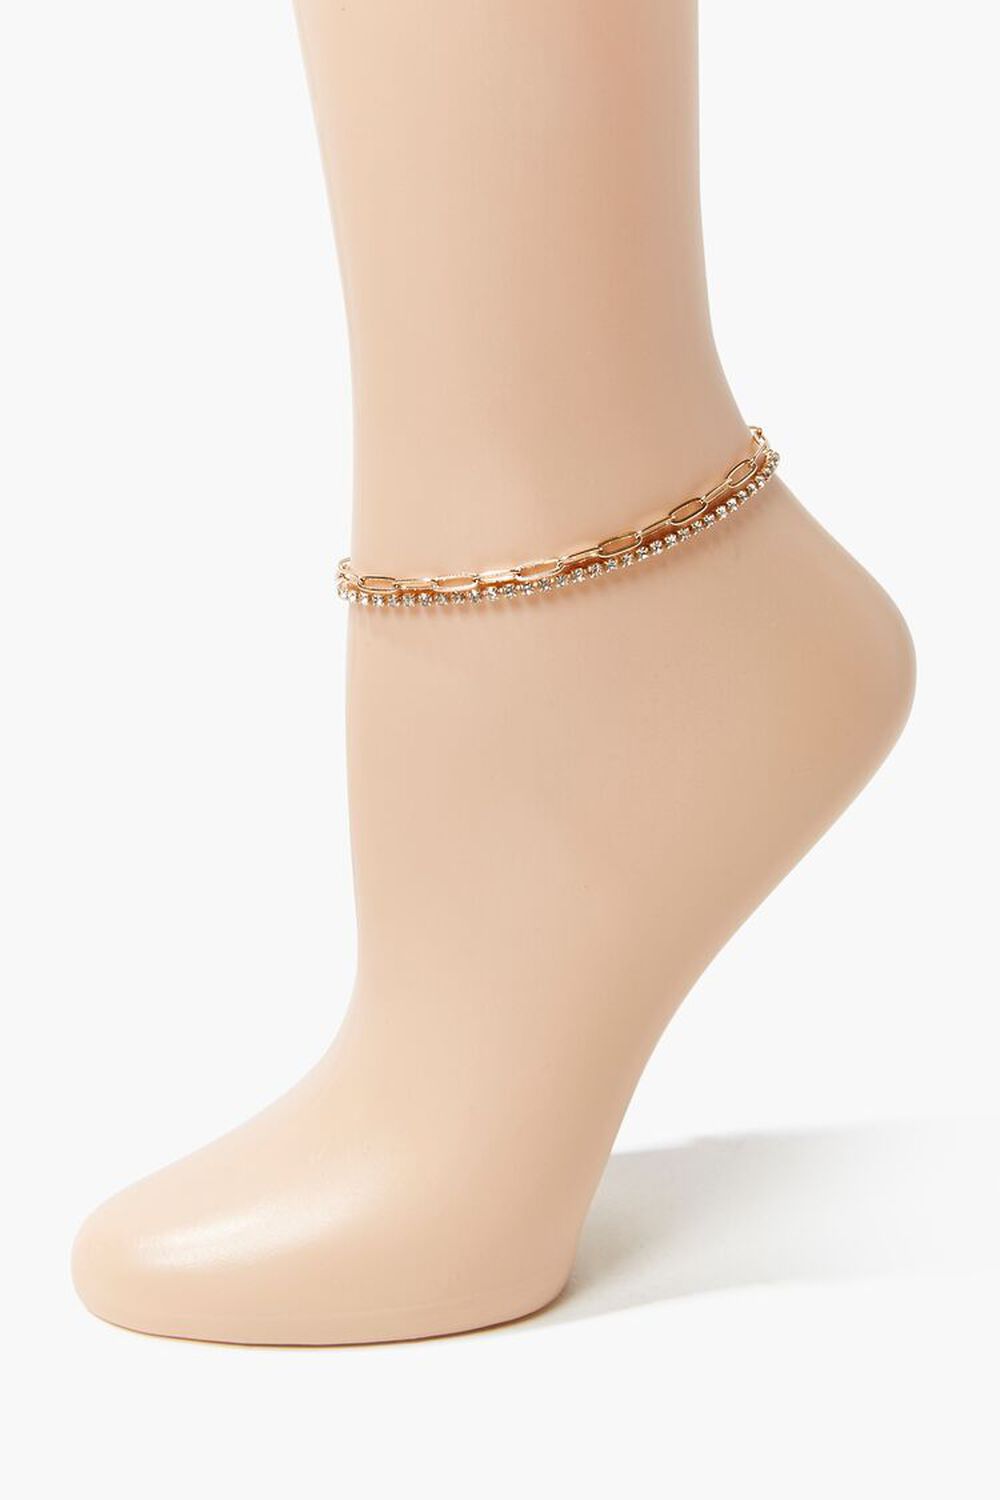 GOLD Layered Chain Anklet, image 1